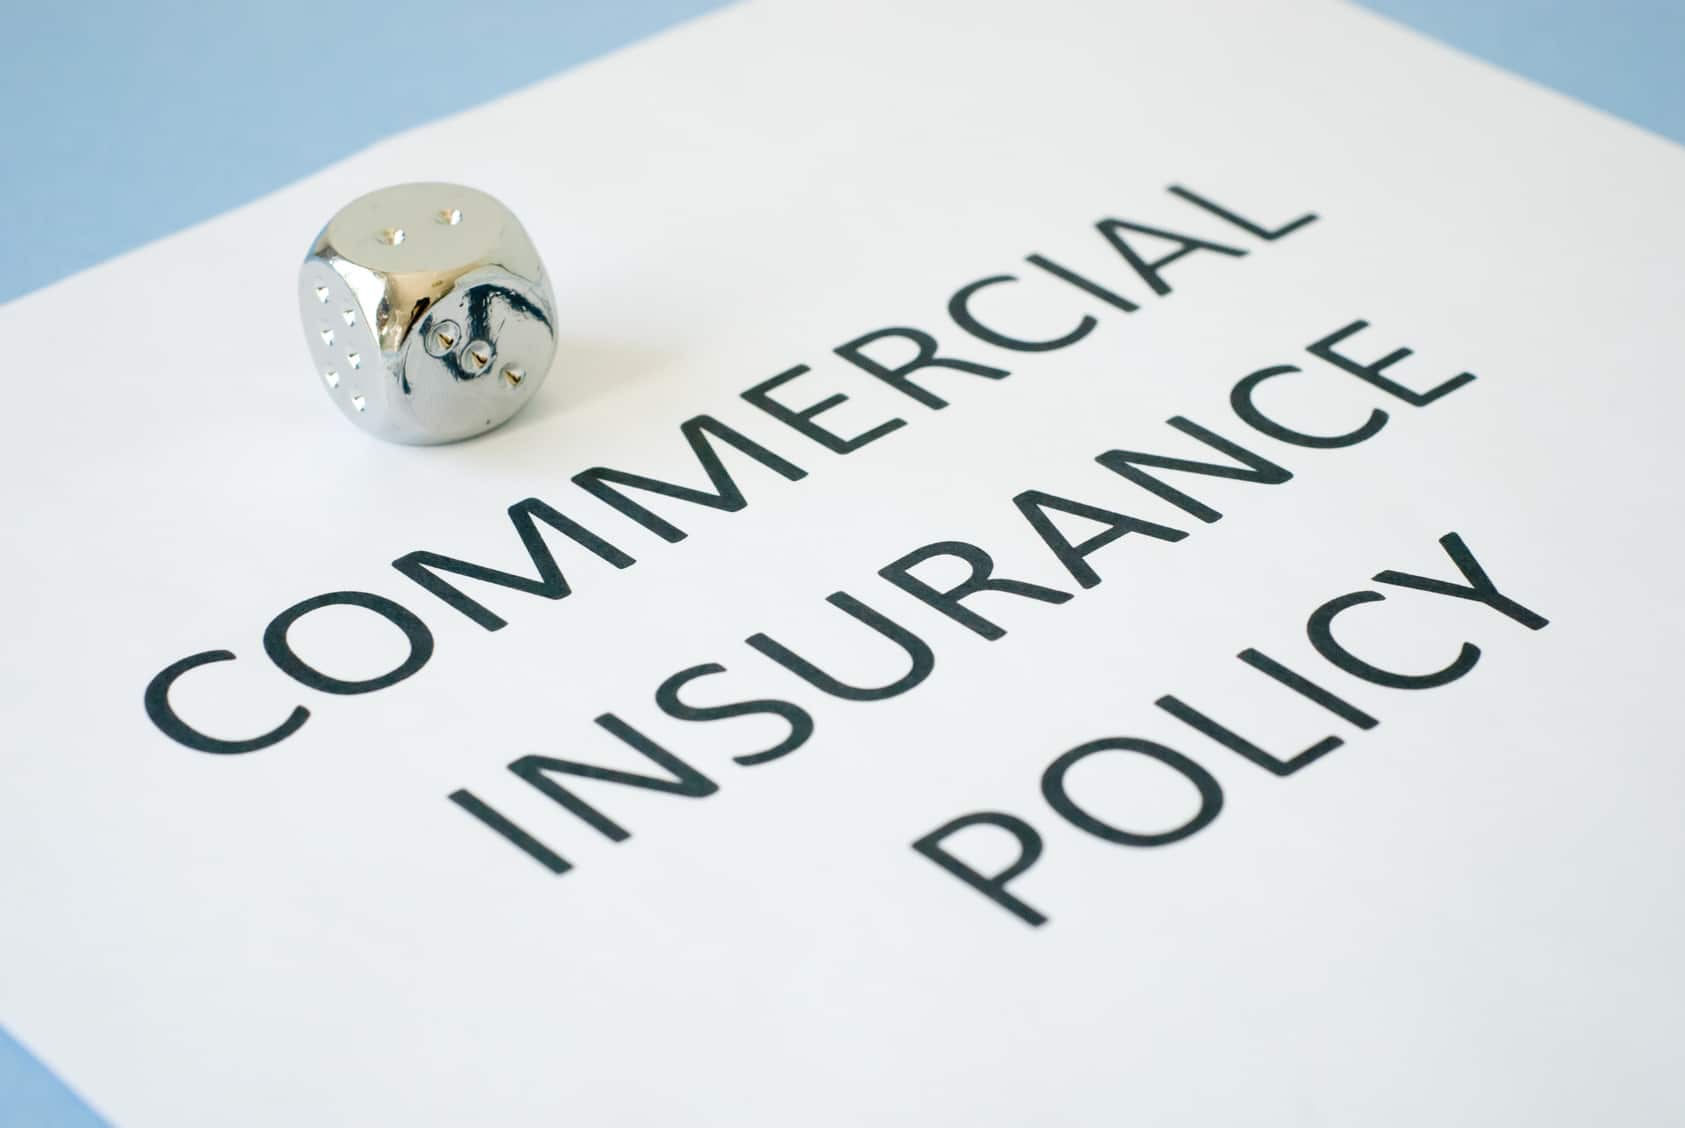 Controlling Your Commercial Auto Premiums